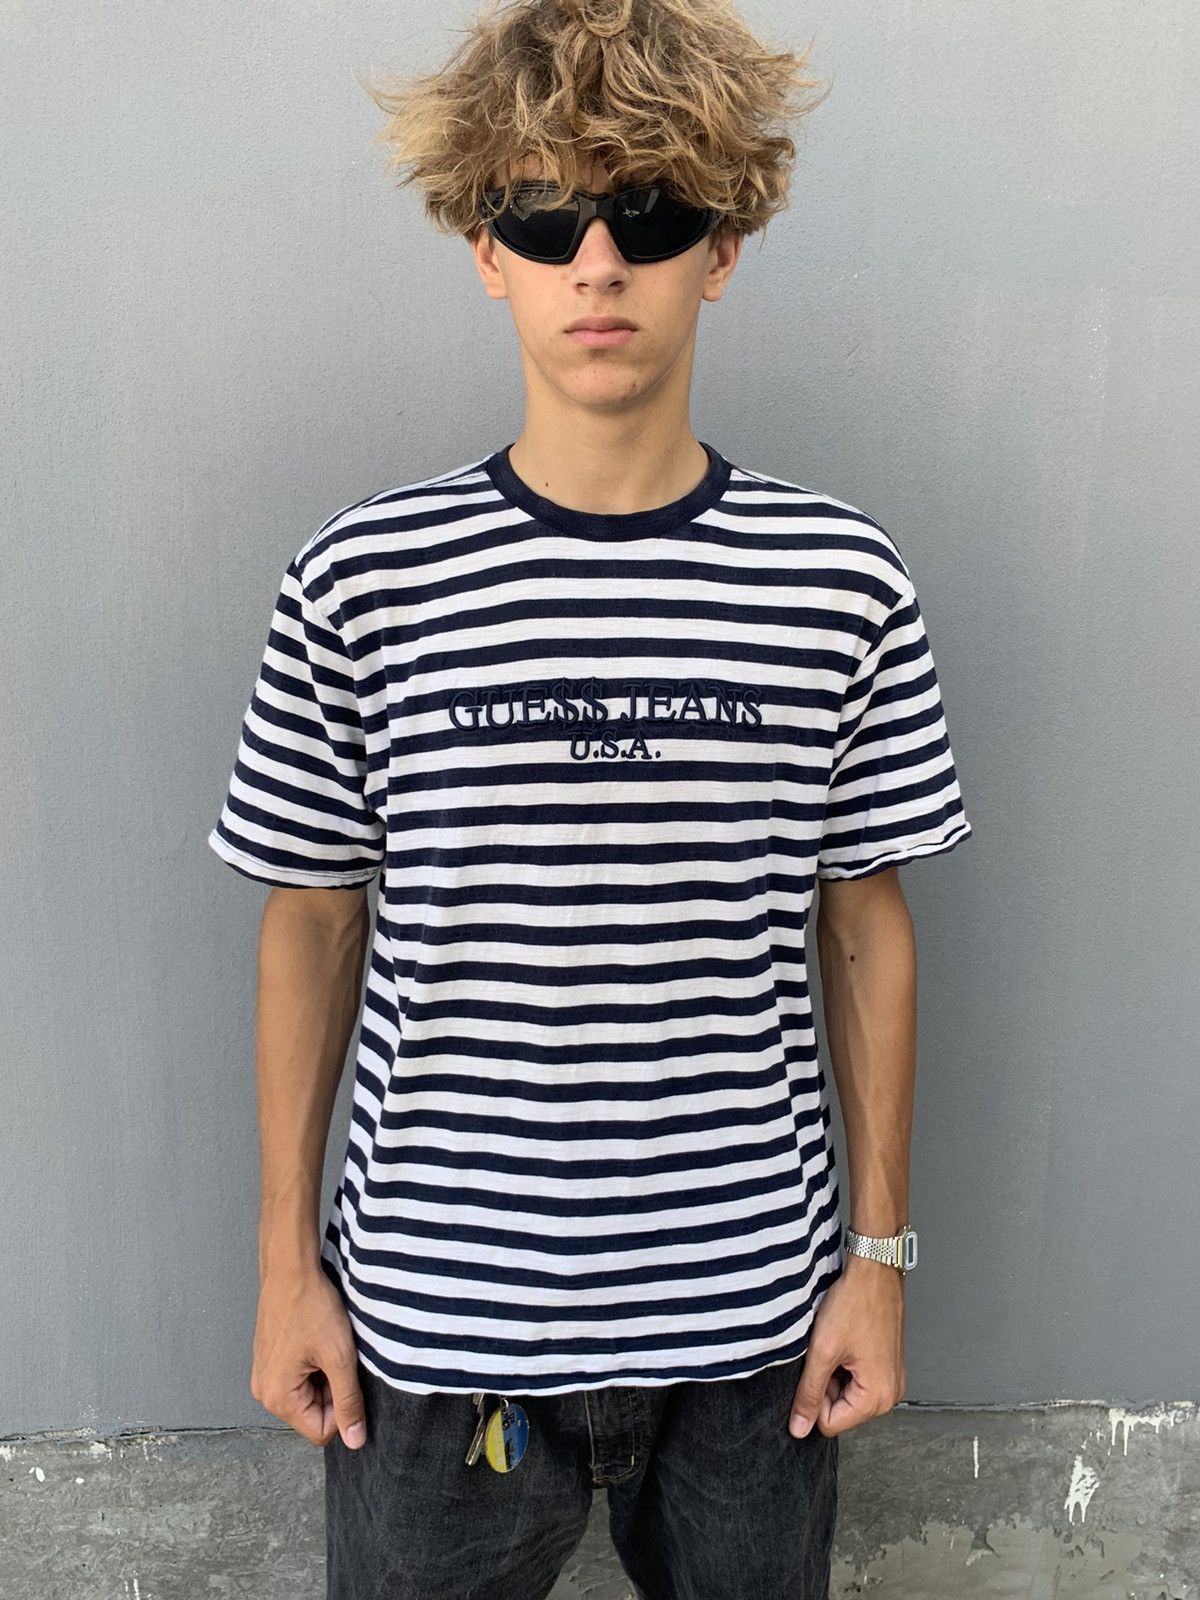 Guess Guess x Asap Rocky Striped Tee | Grailed